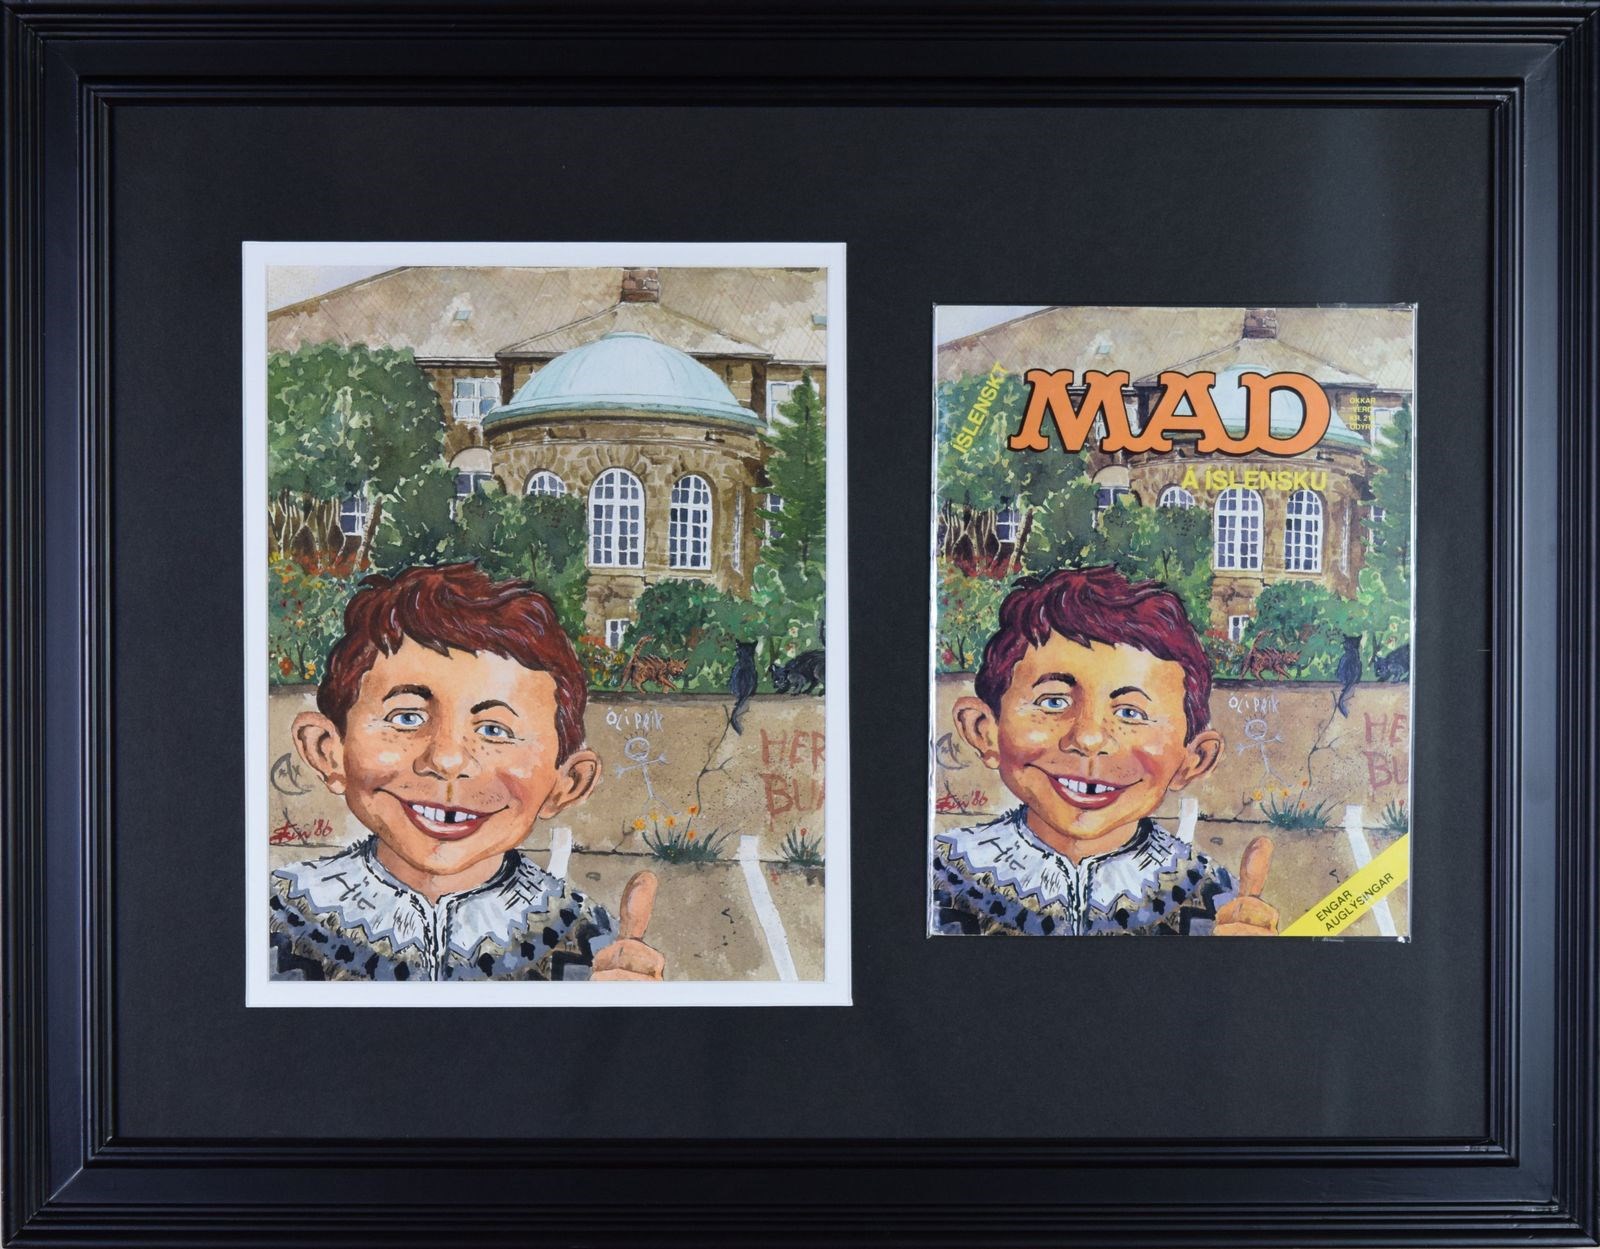 Comics - MAD Magazine Iceland #1 Issue Original Cover Art with the #1 Issue Magazine - The Rarest of all MAD Magazine Editions